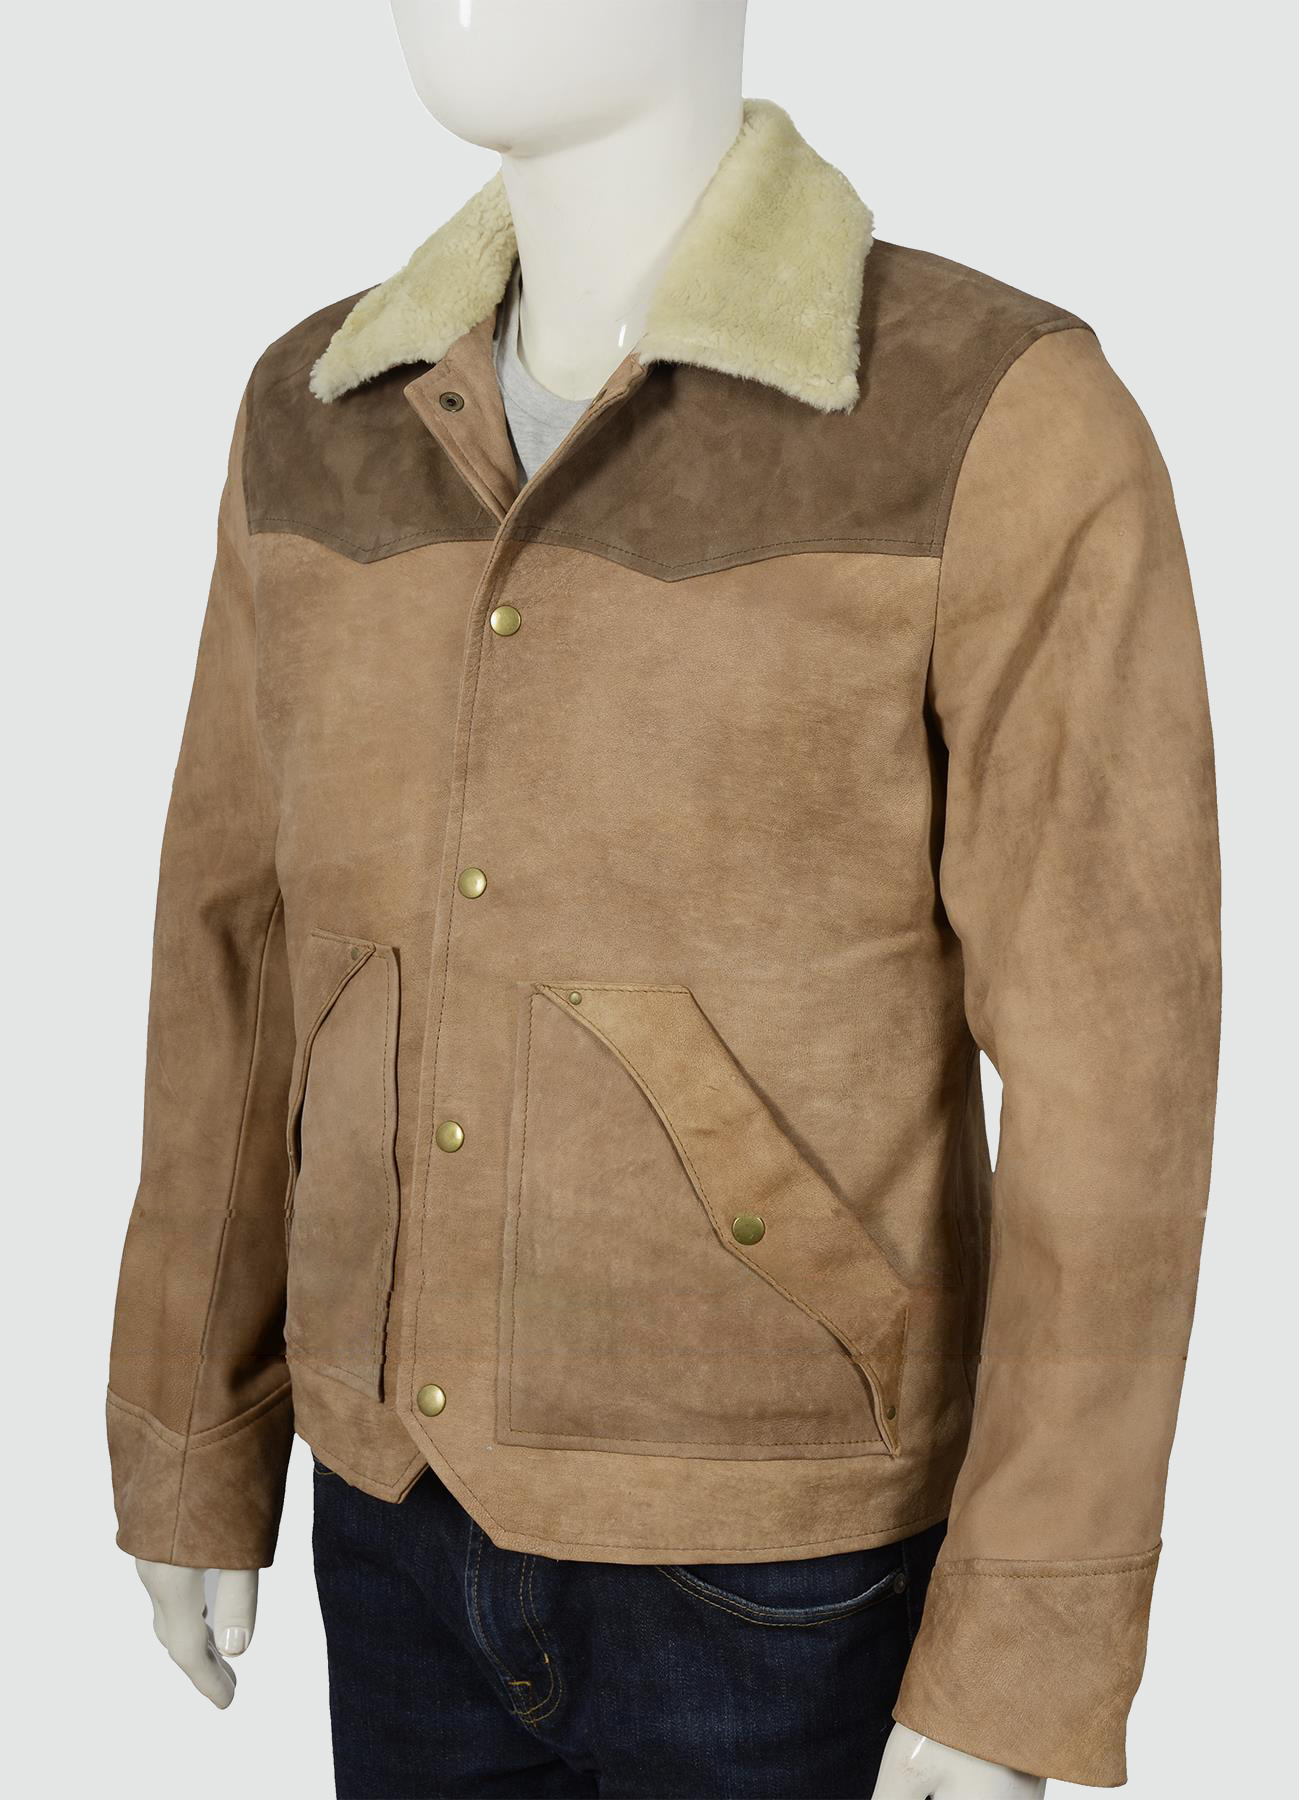 kevin-costner-yellowstone-john-dutton-raw-leather-jacket-for-men (3)